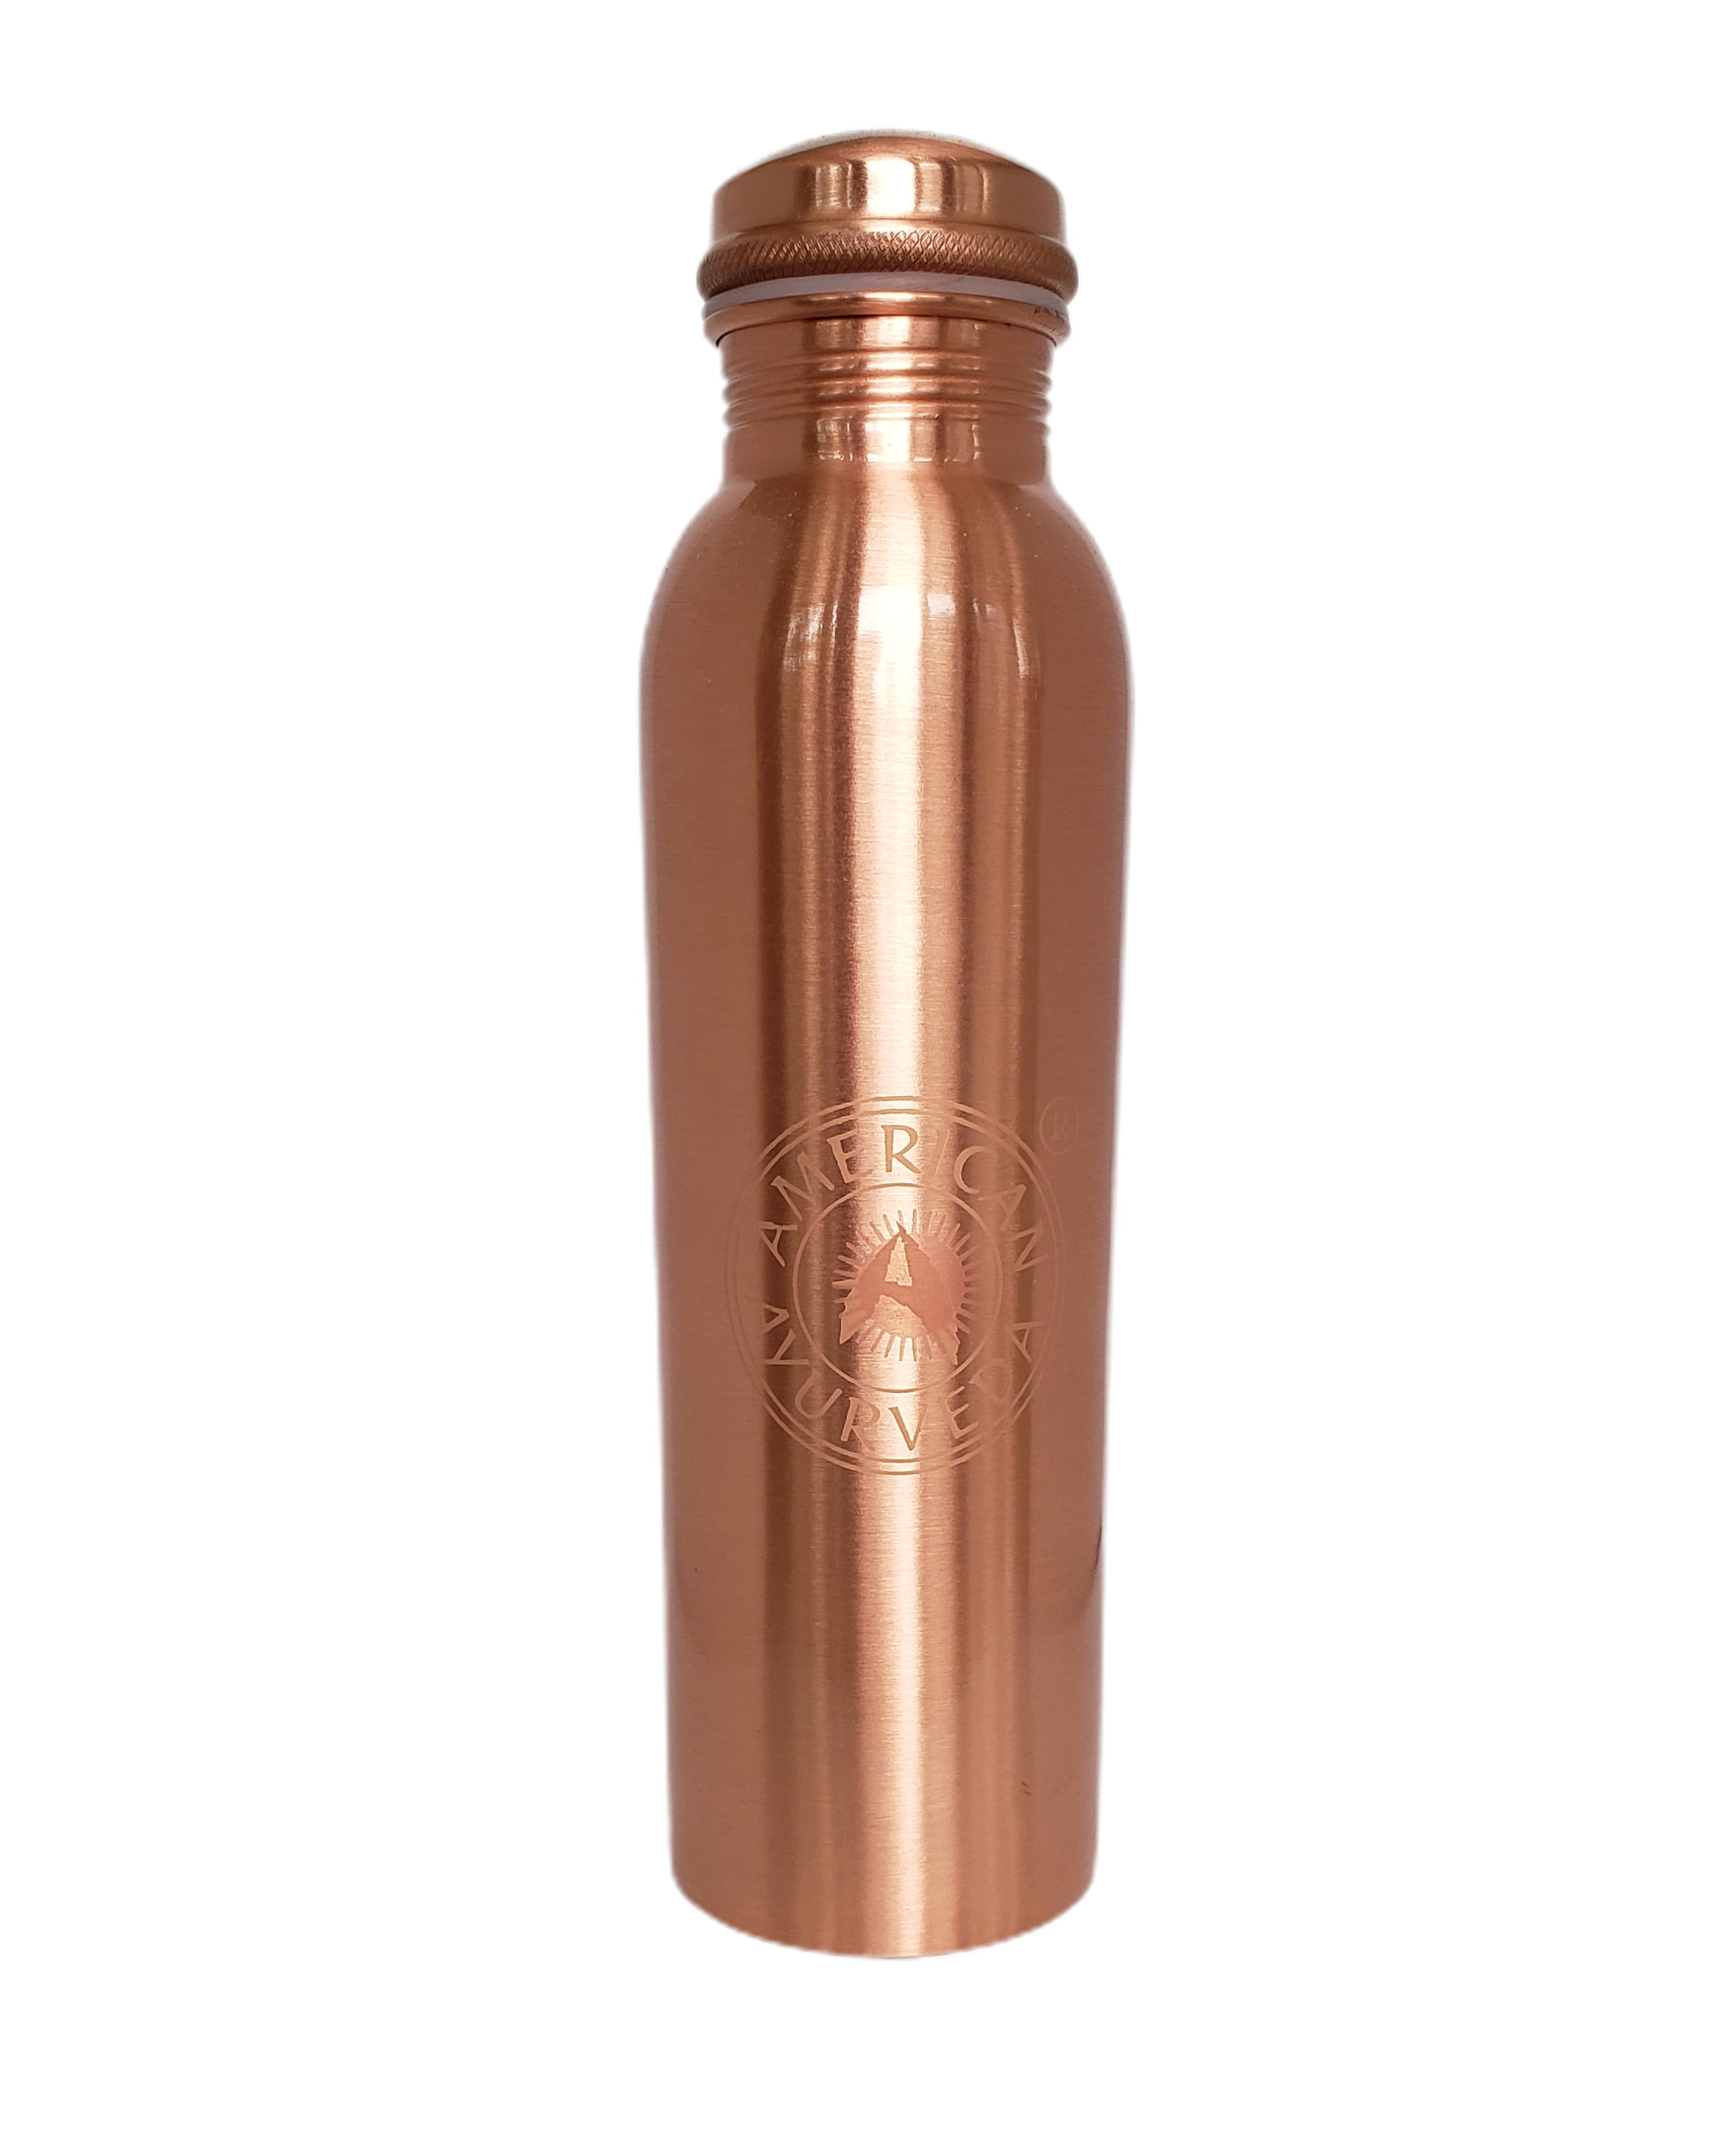 Handmade 100% Copper Yoga Water Bottle or Thermos Flask Joint Free & Leak Proof 